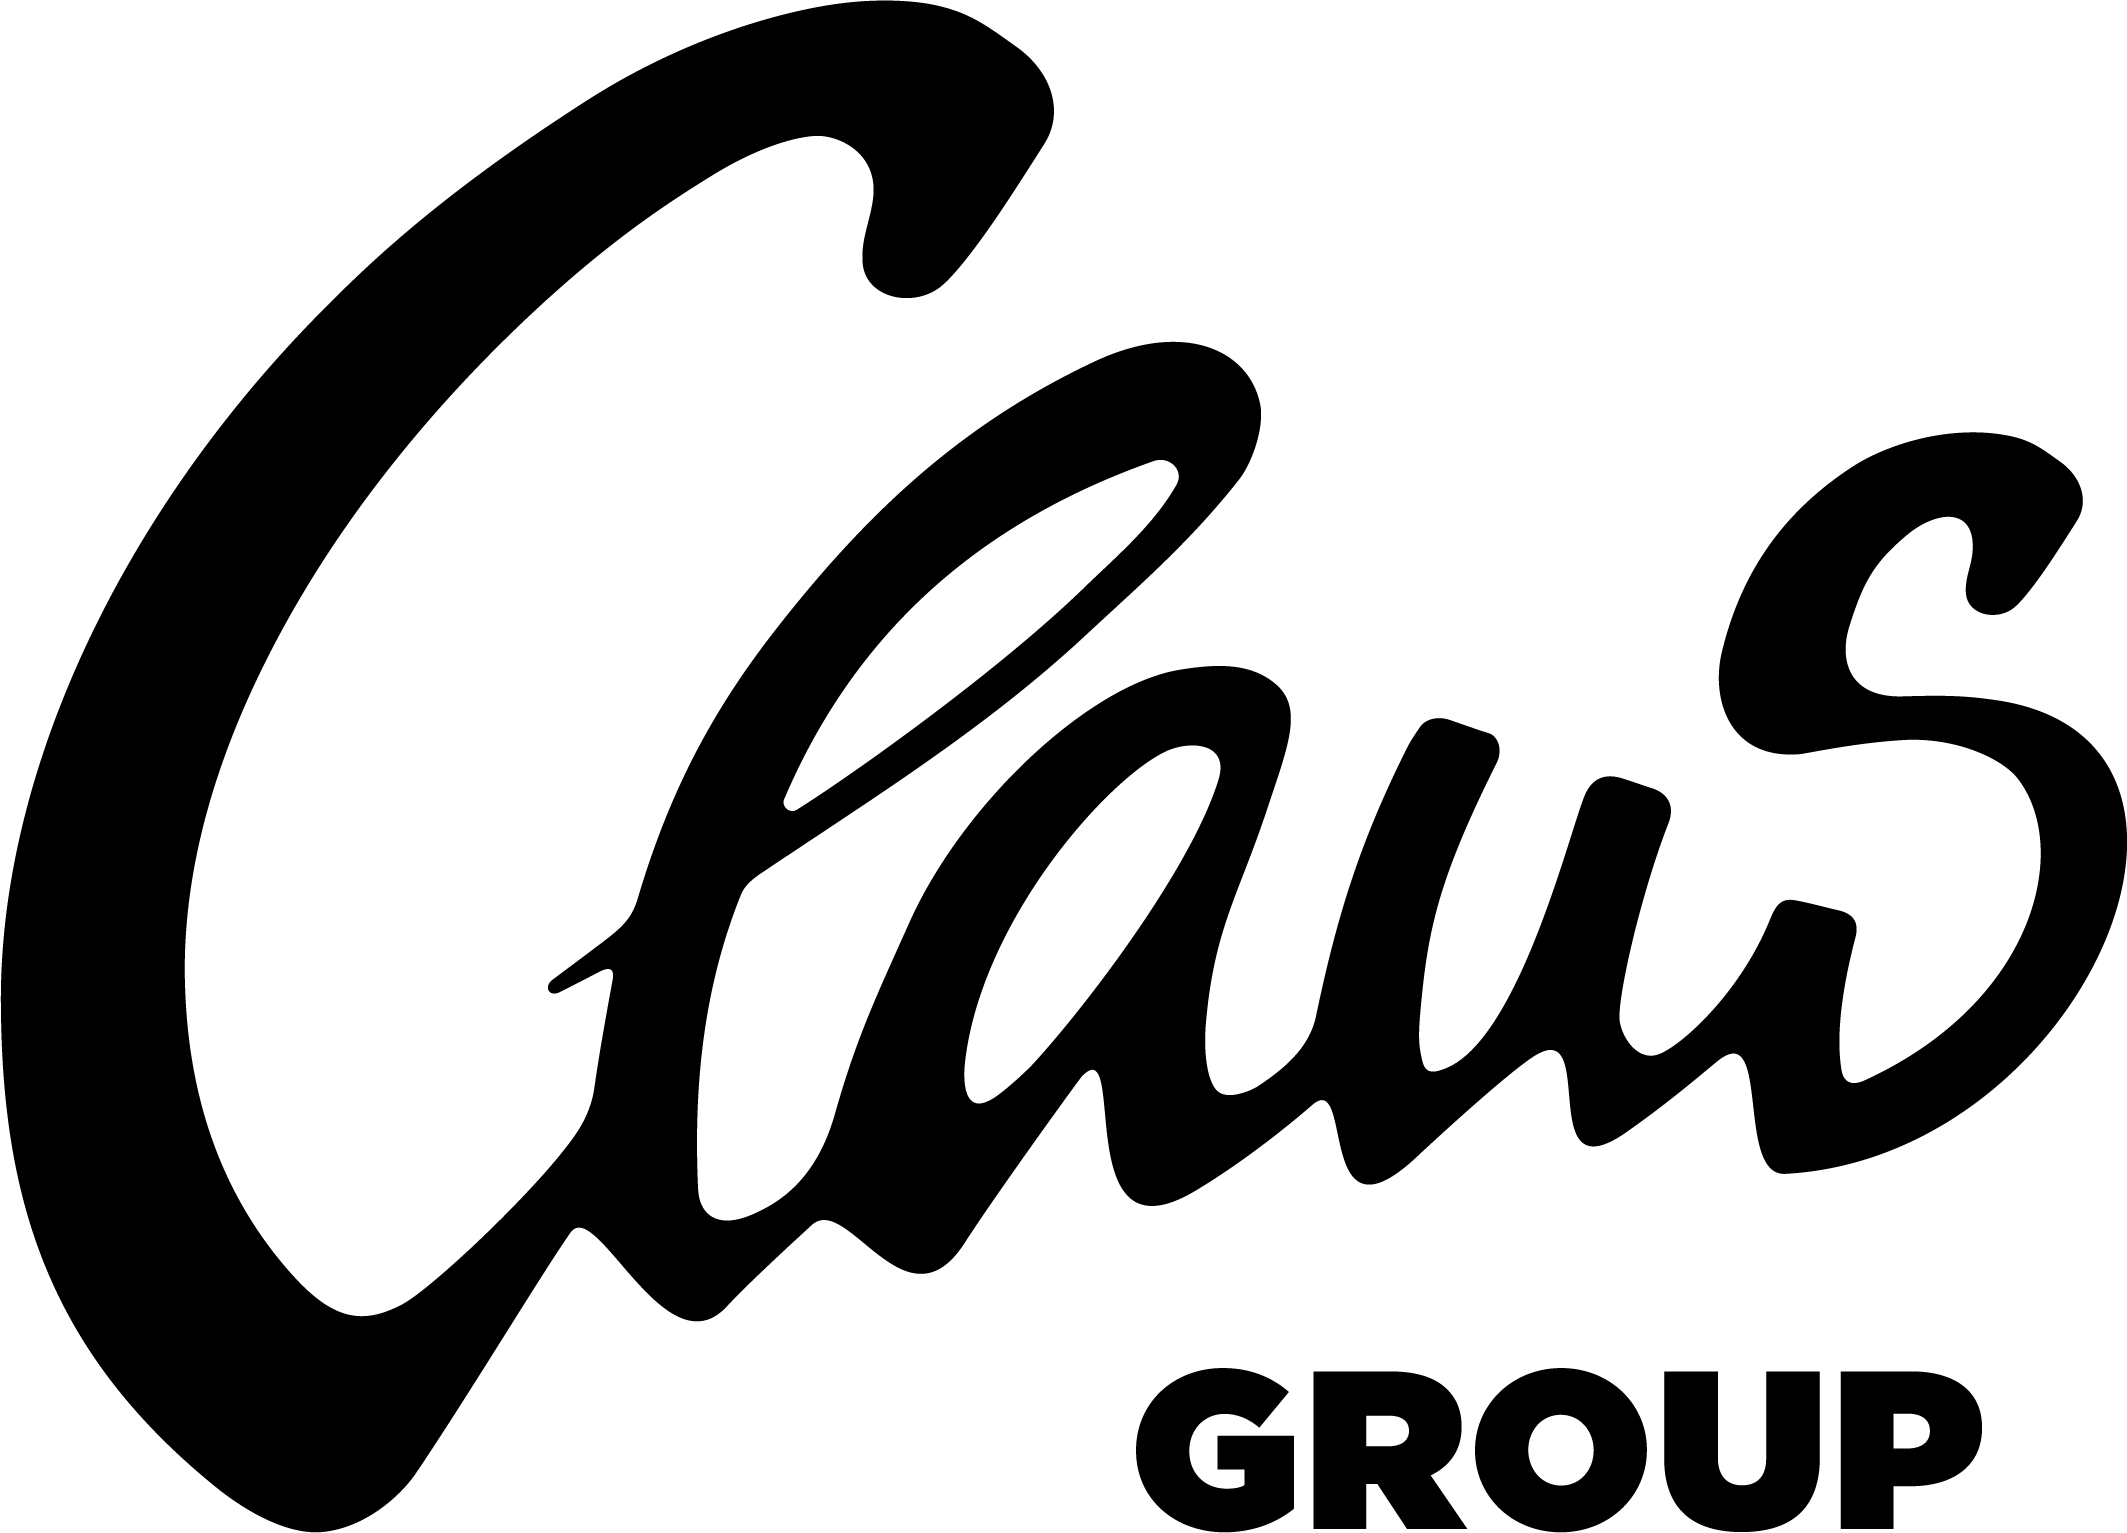 Claus Group